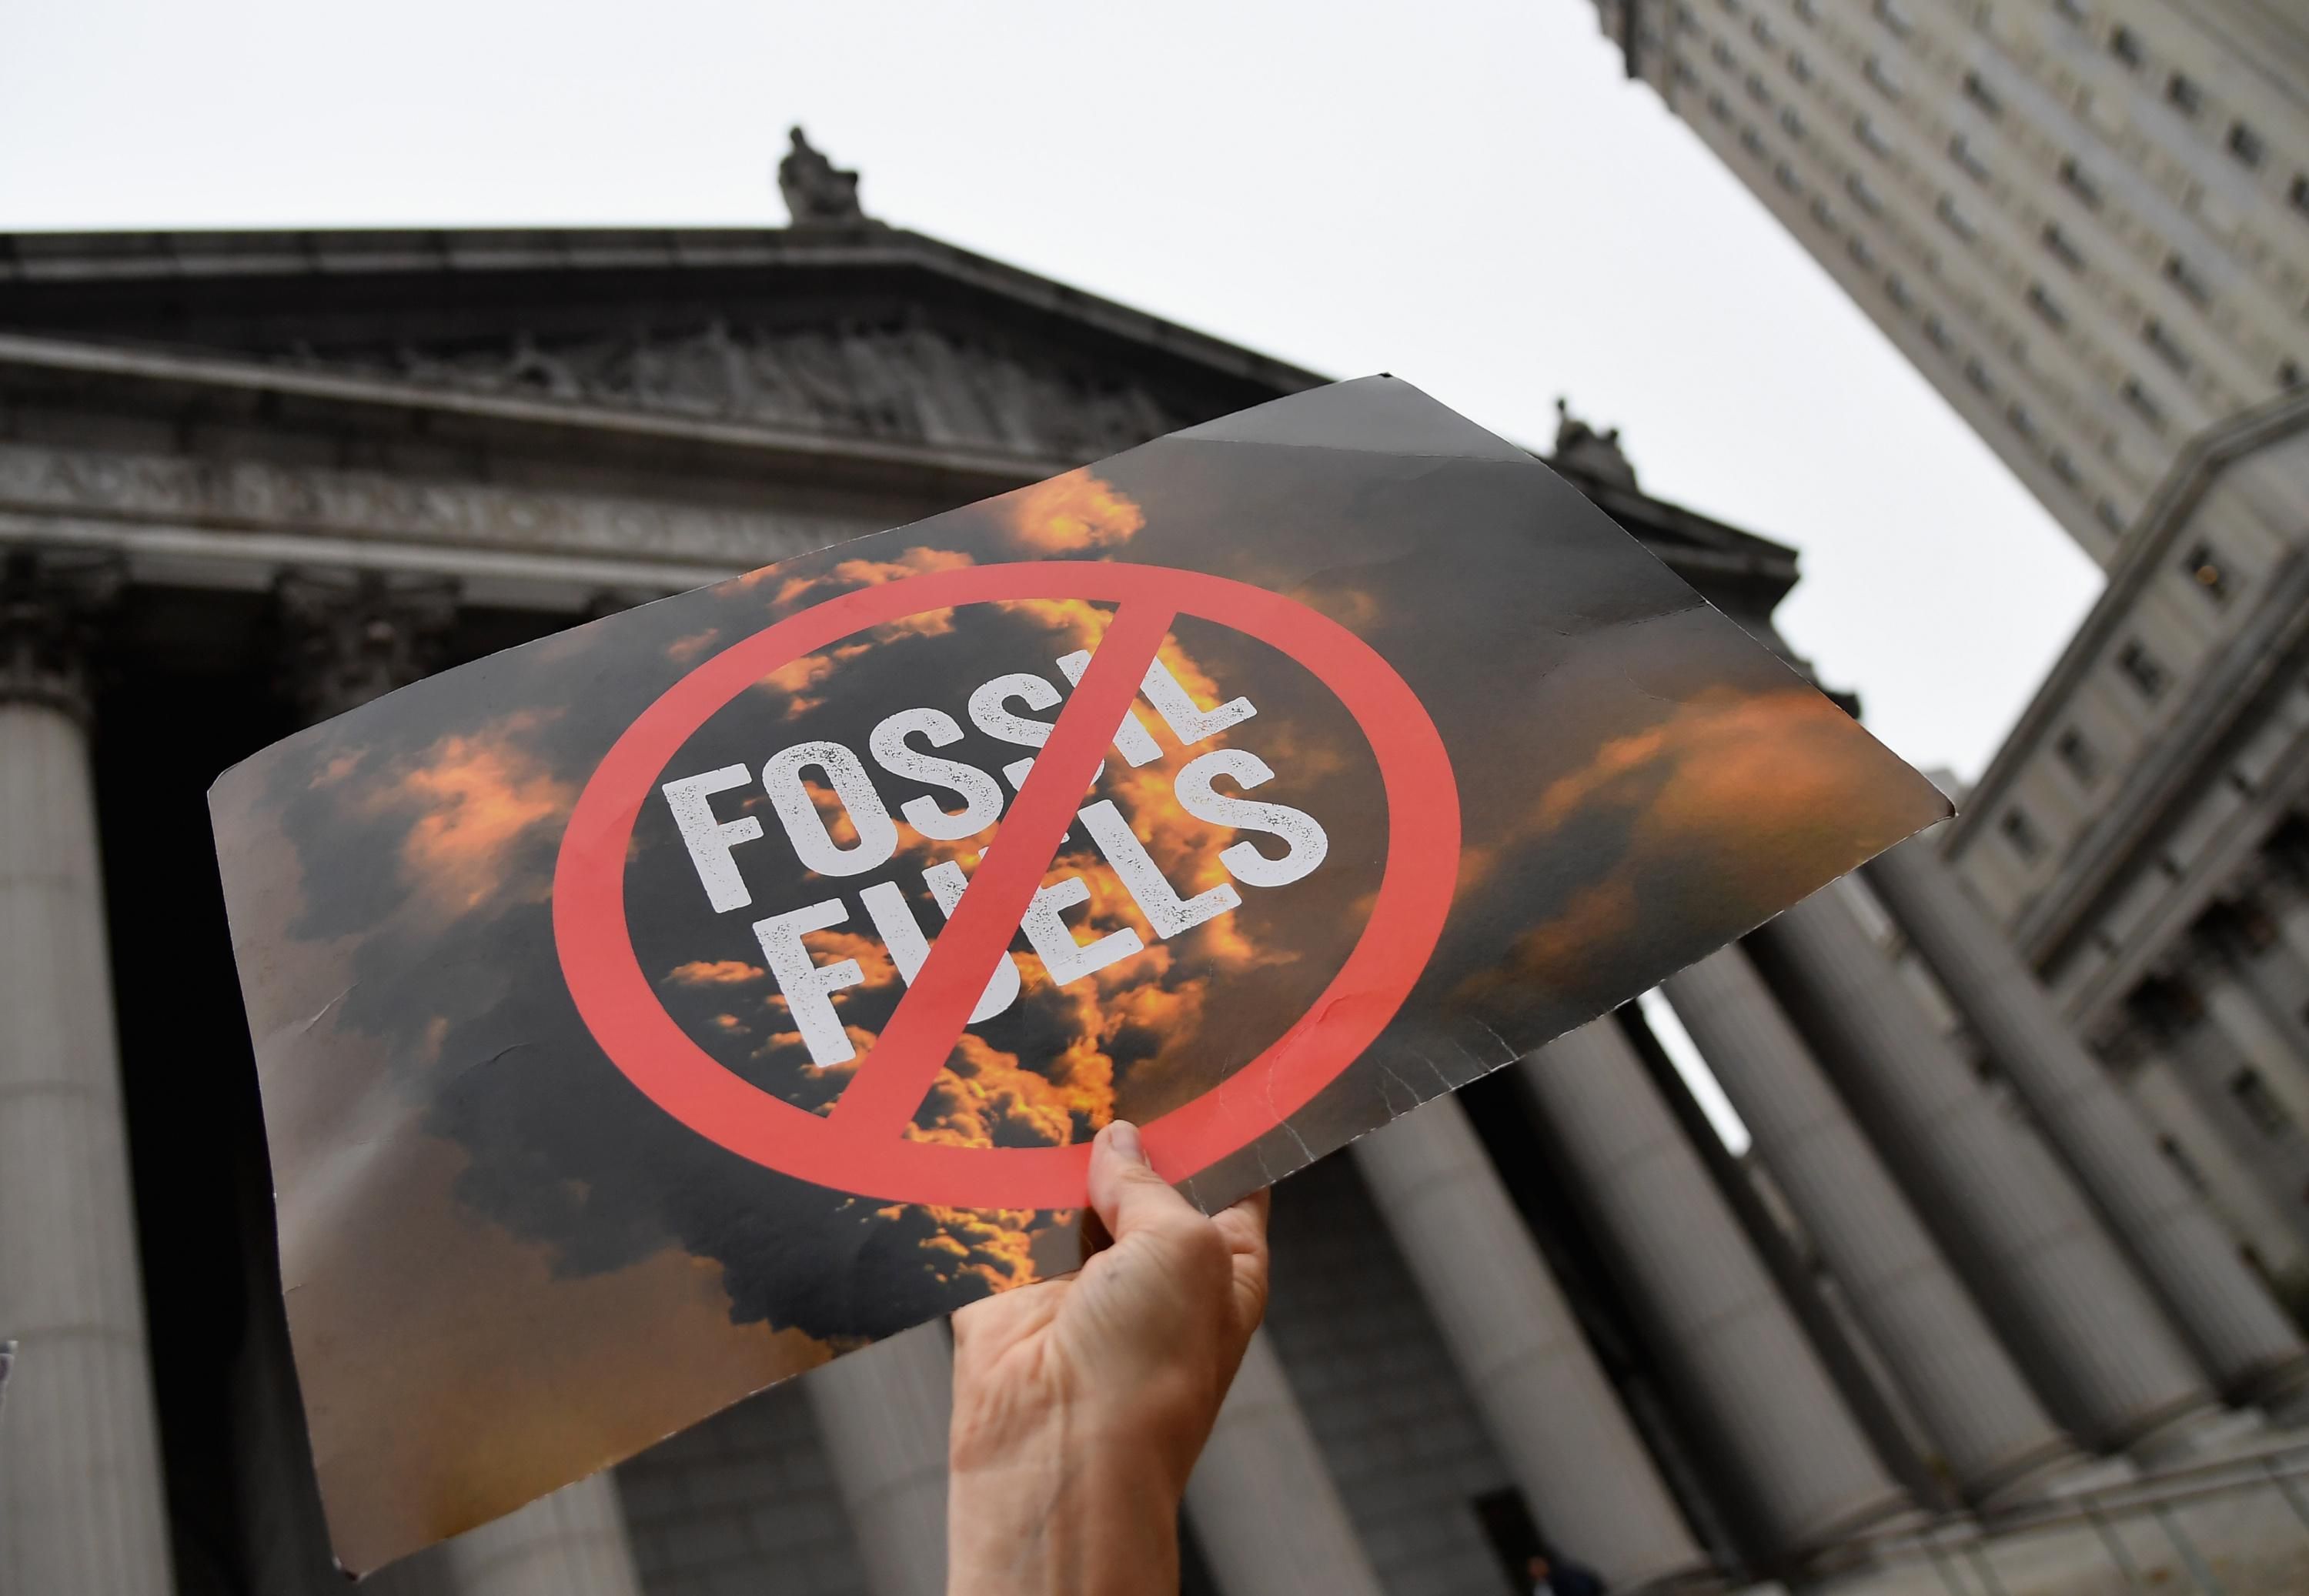 Climate activists protest on the fist day of the ExxonMobil trial outside the New York State Supreme Court building on October 22, 2019 in New York City. (Photo: Angela Weiss/AFP via Getty Images)